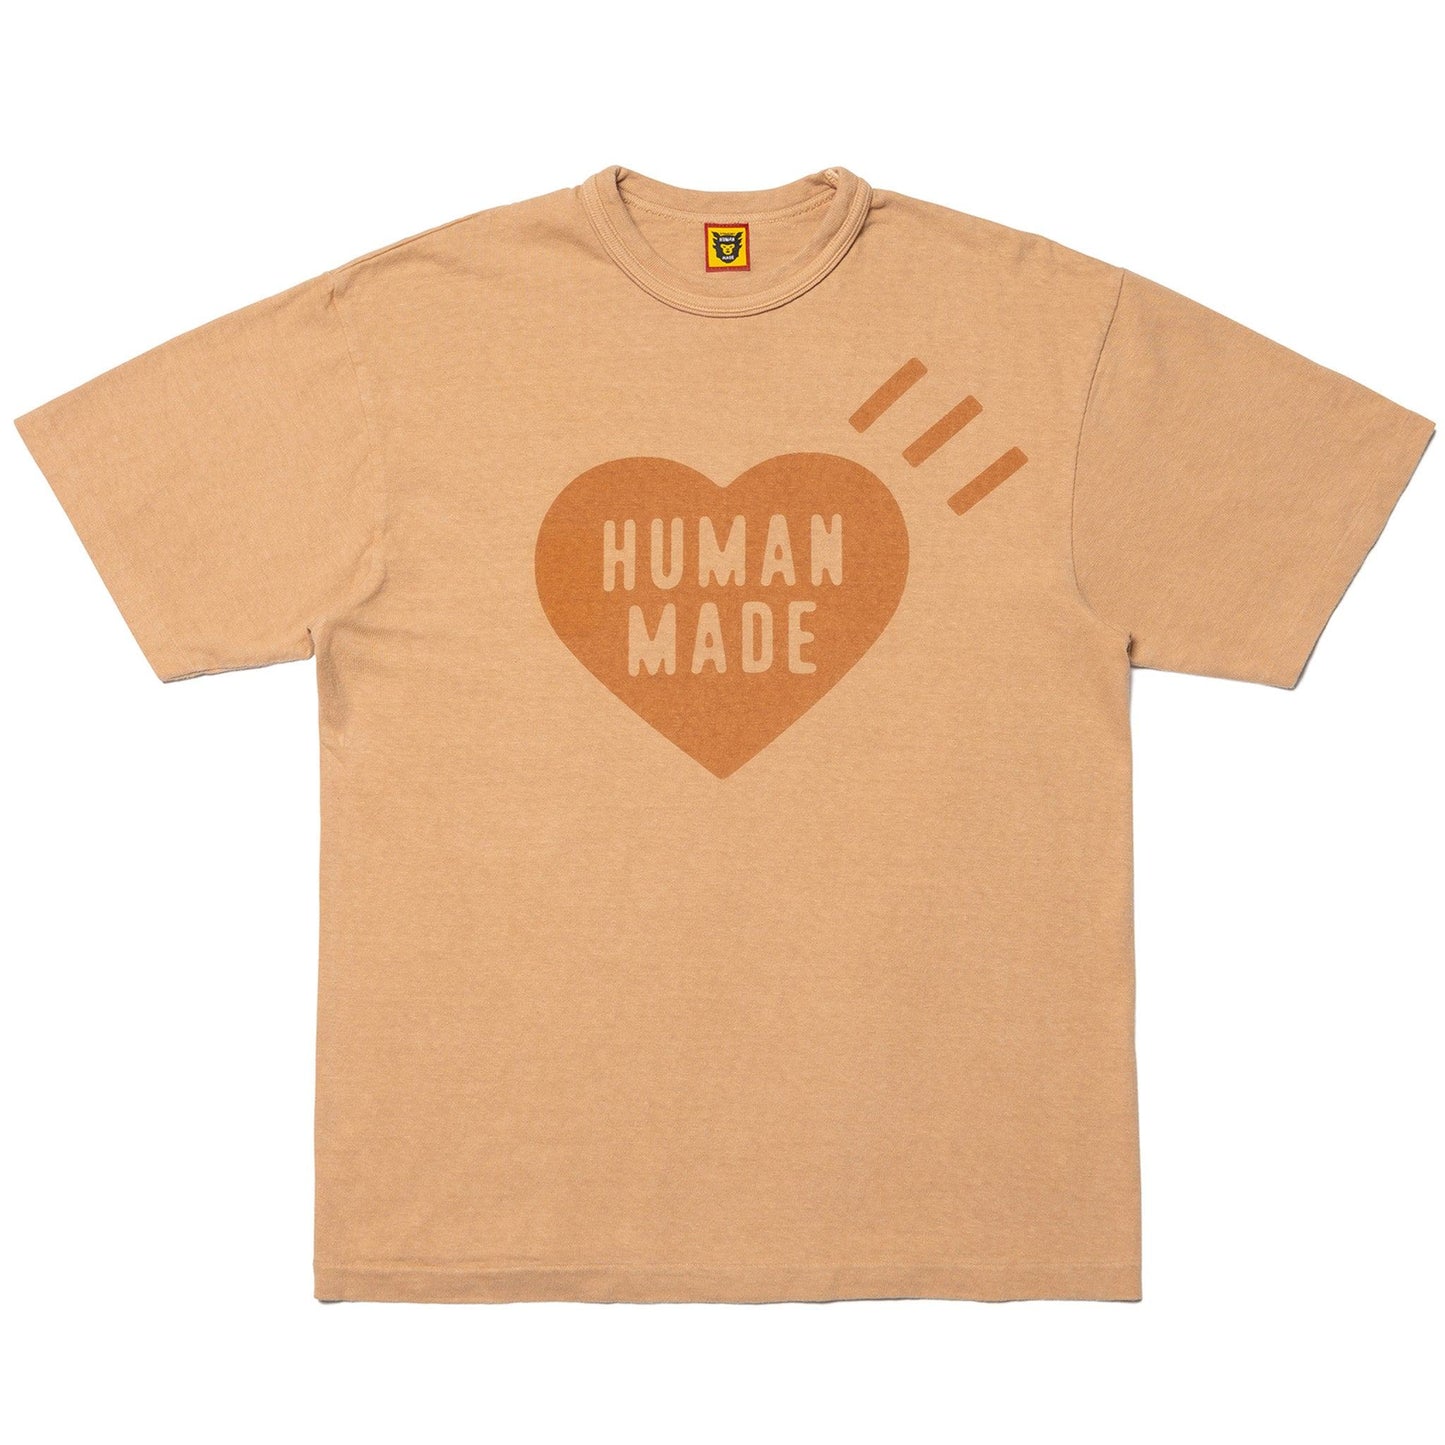 PLANT DYED T-SHIRT #3 - Human Made